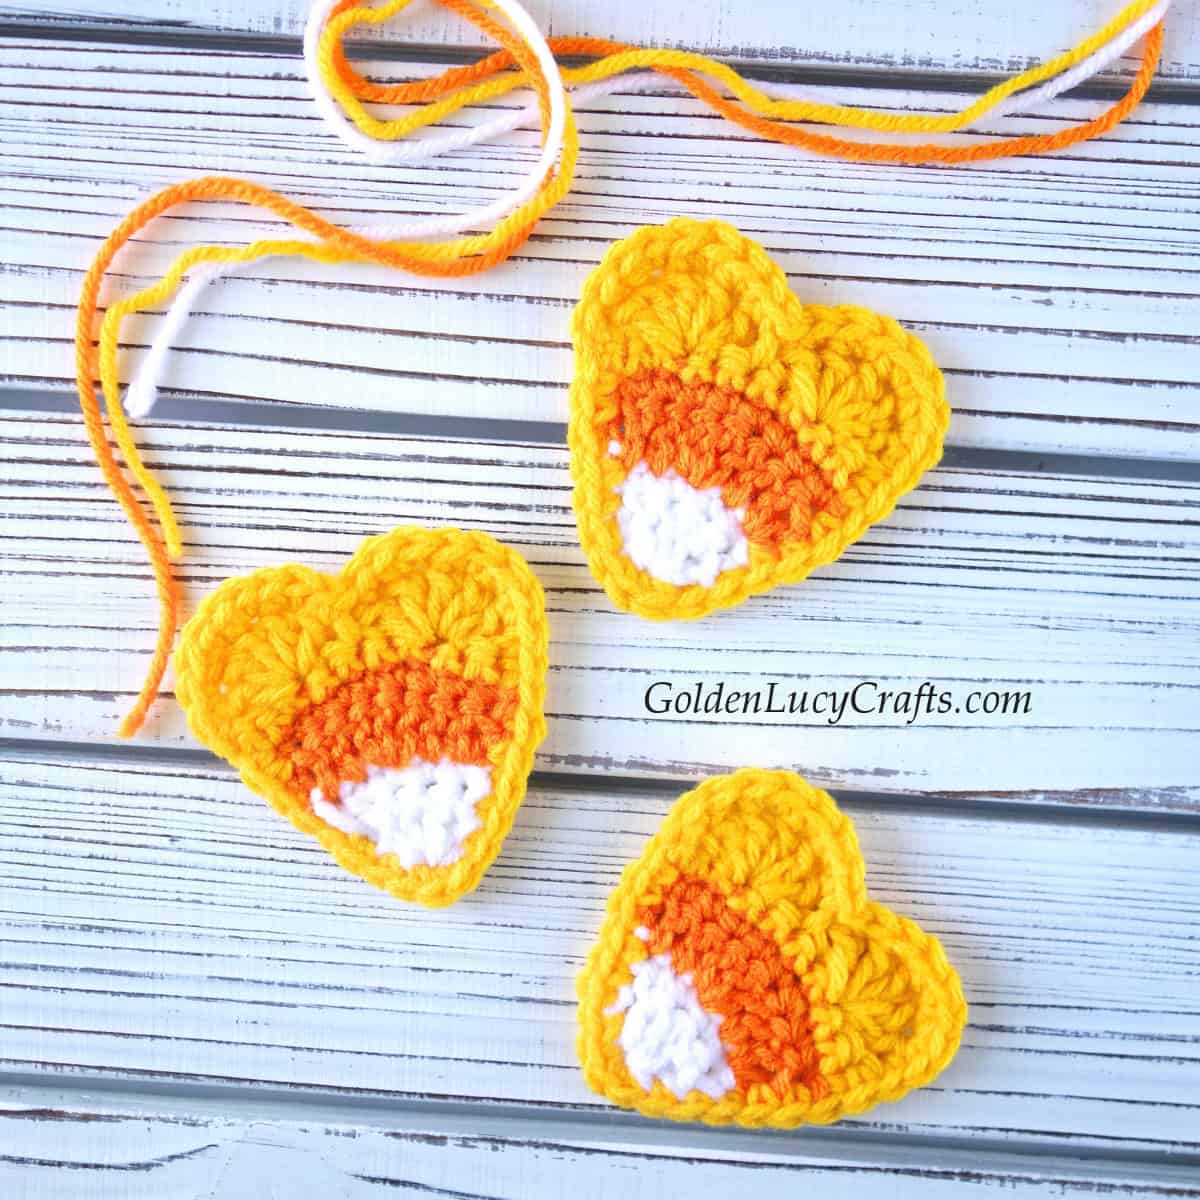 Three crocheted candy corn heart appliques.